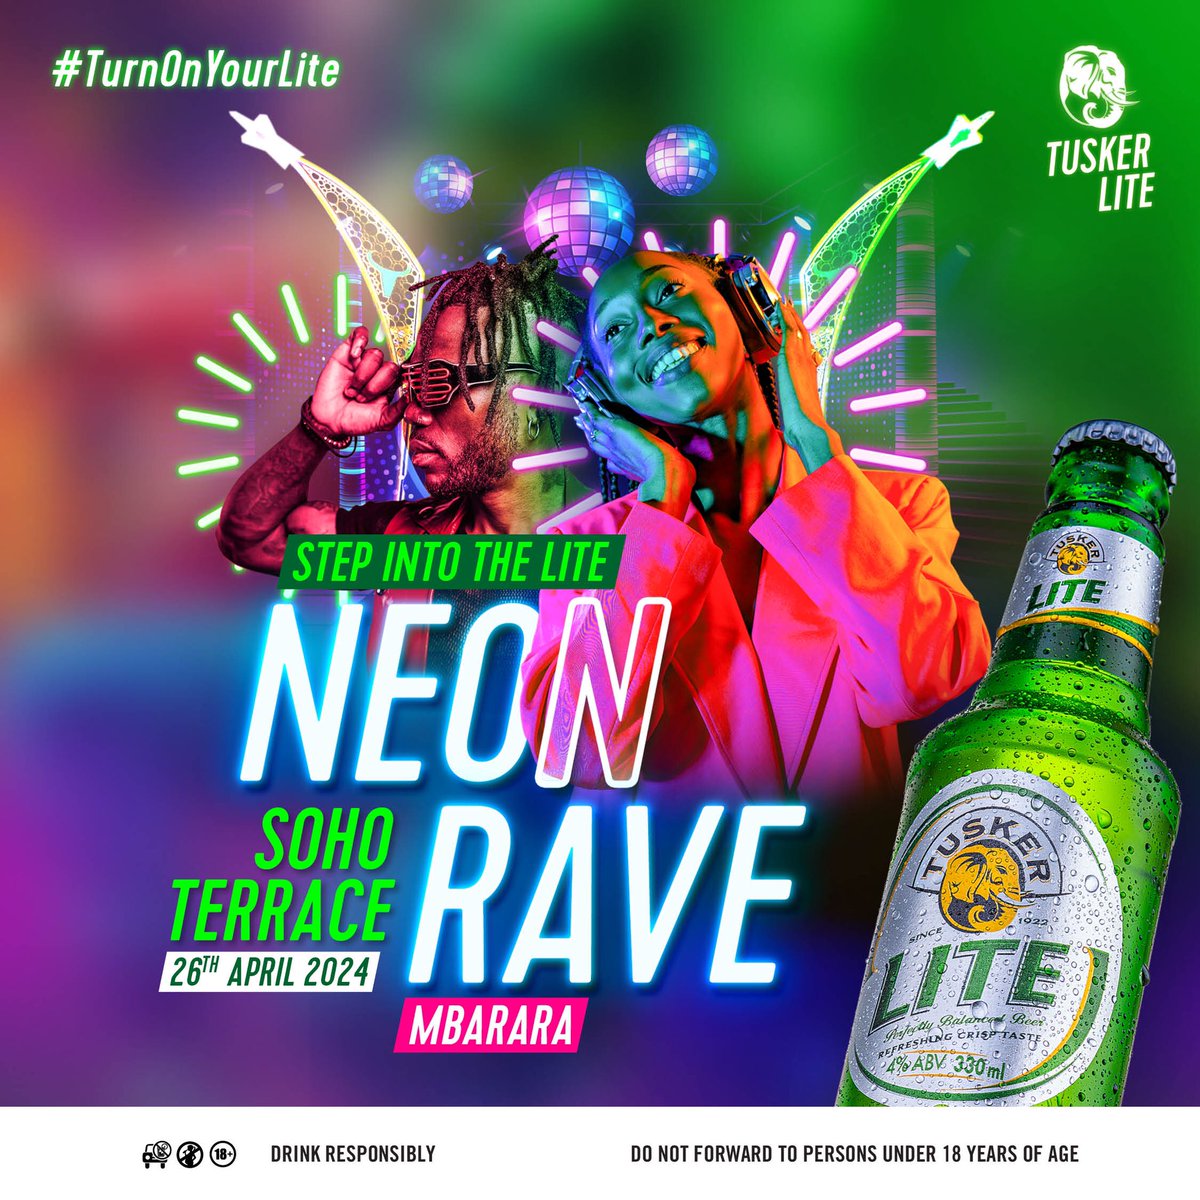 Now that the #NeonRaveMbarara is coming to @SoHoTerraceMbra I think should fill my fridge with more tusker lite bottles and get ready to #TurnOnYourLite